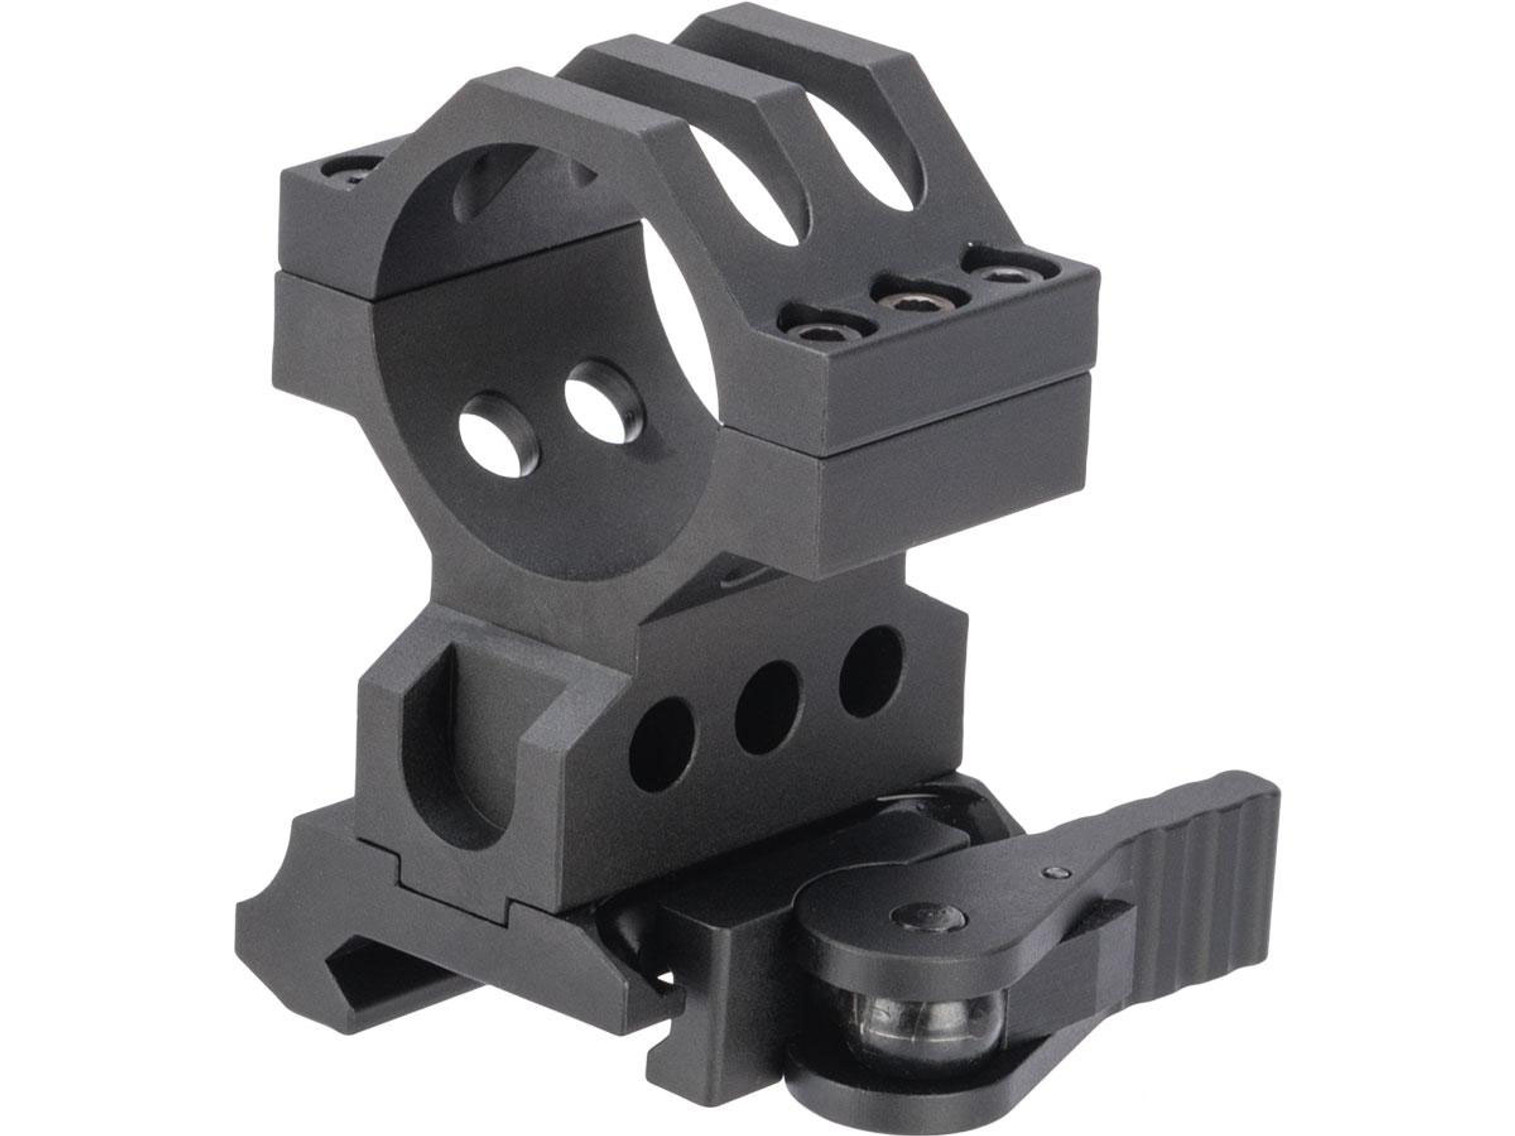 G&P 30mm Quick-Lock QD Scope Mount for Red Dots / Rifle Scopes (Model: Lower 1/3 Cowitness)